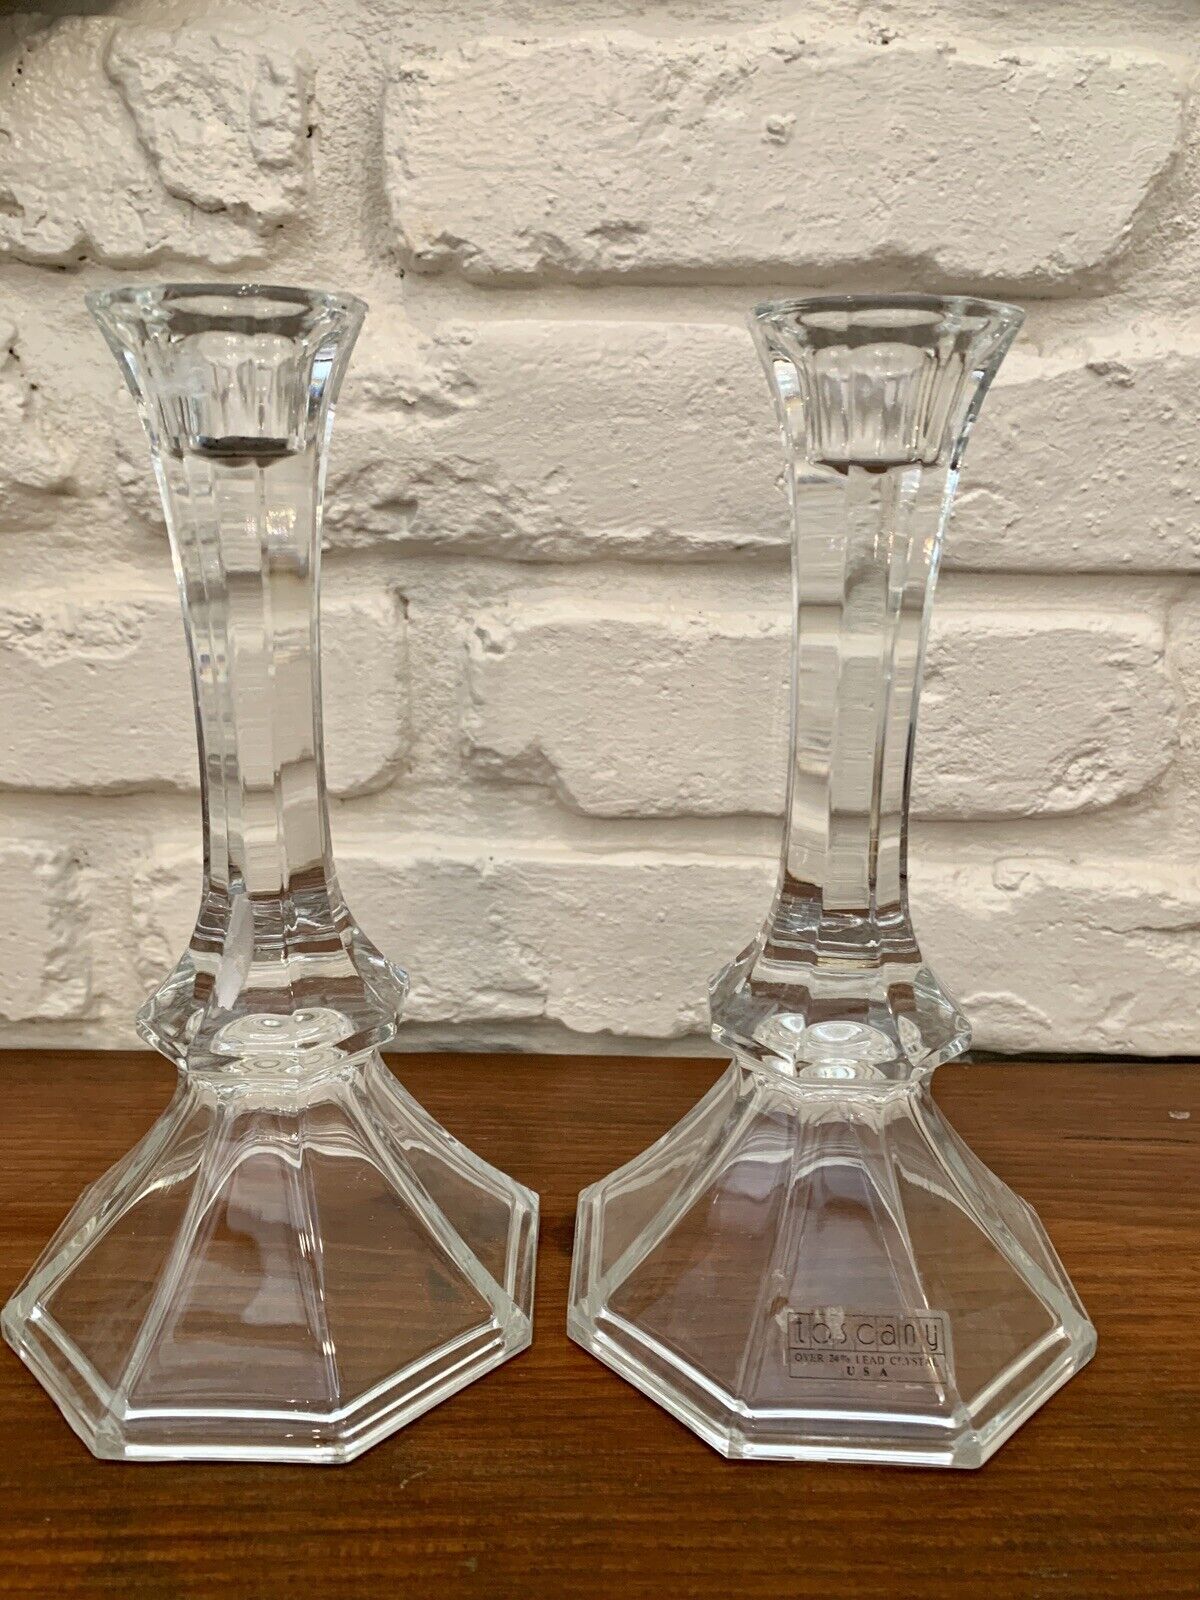 Pair Toscany 24% Lead Crystal Candlestick Holders Made in Romania 7 3/4” Tall